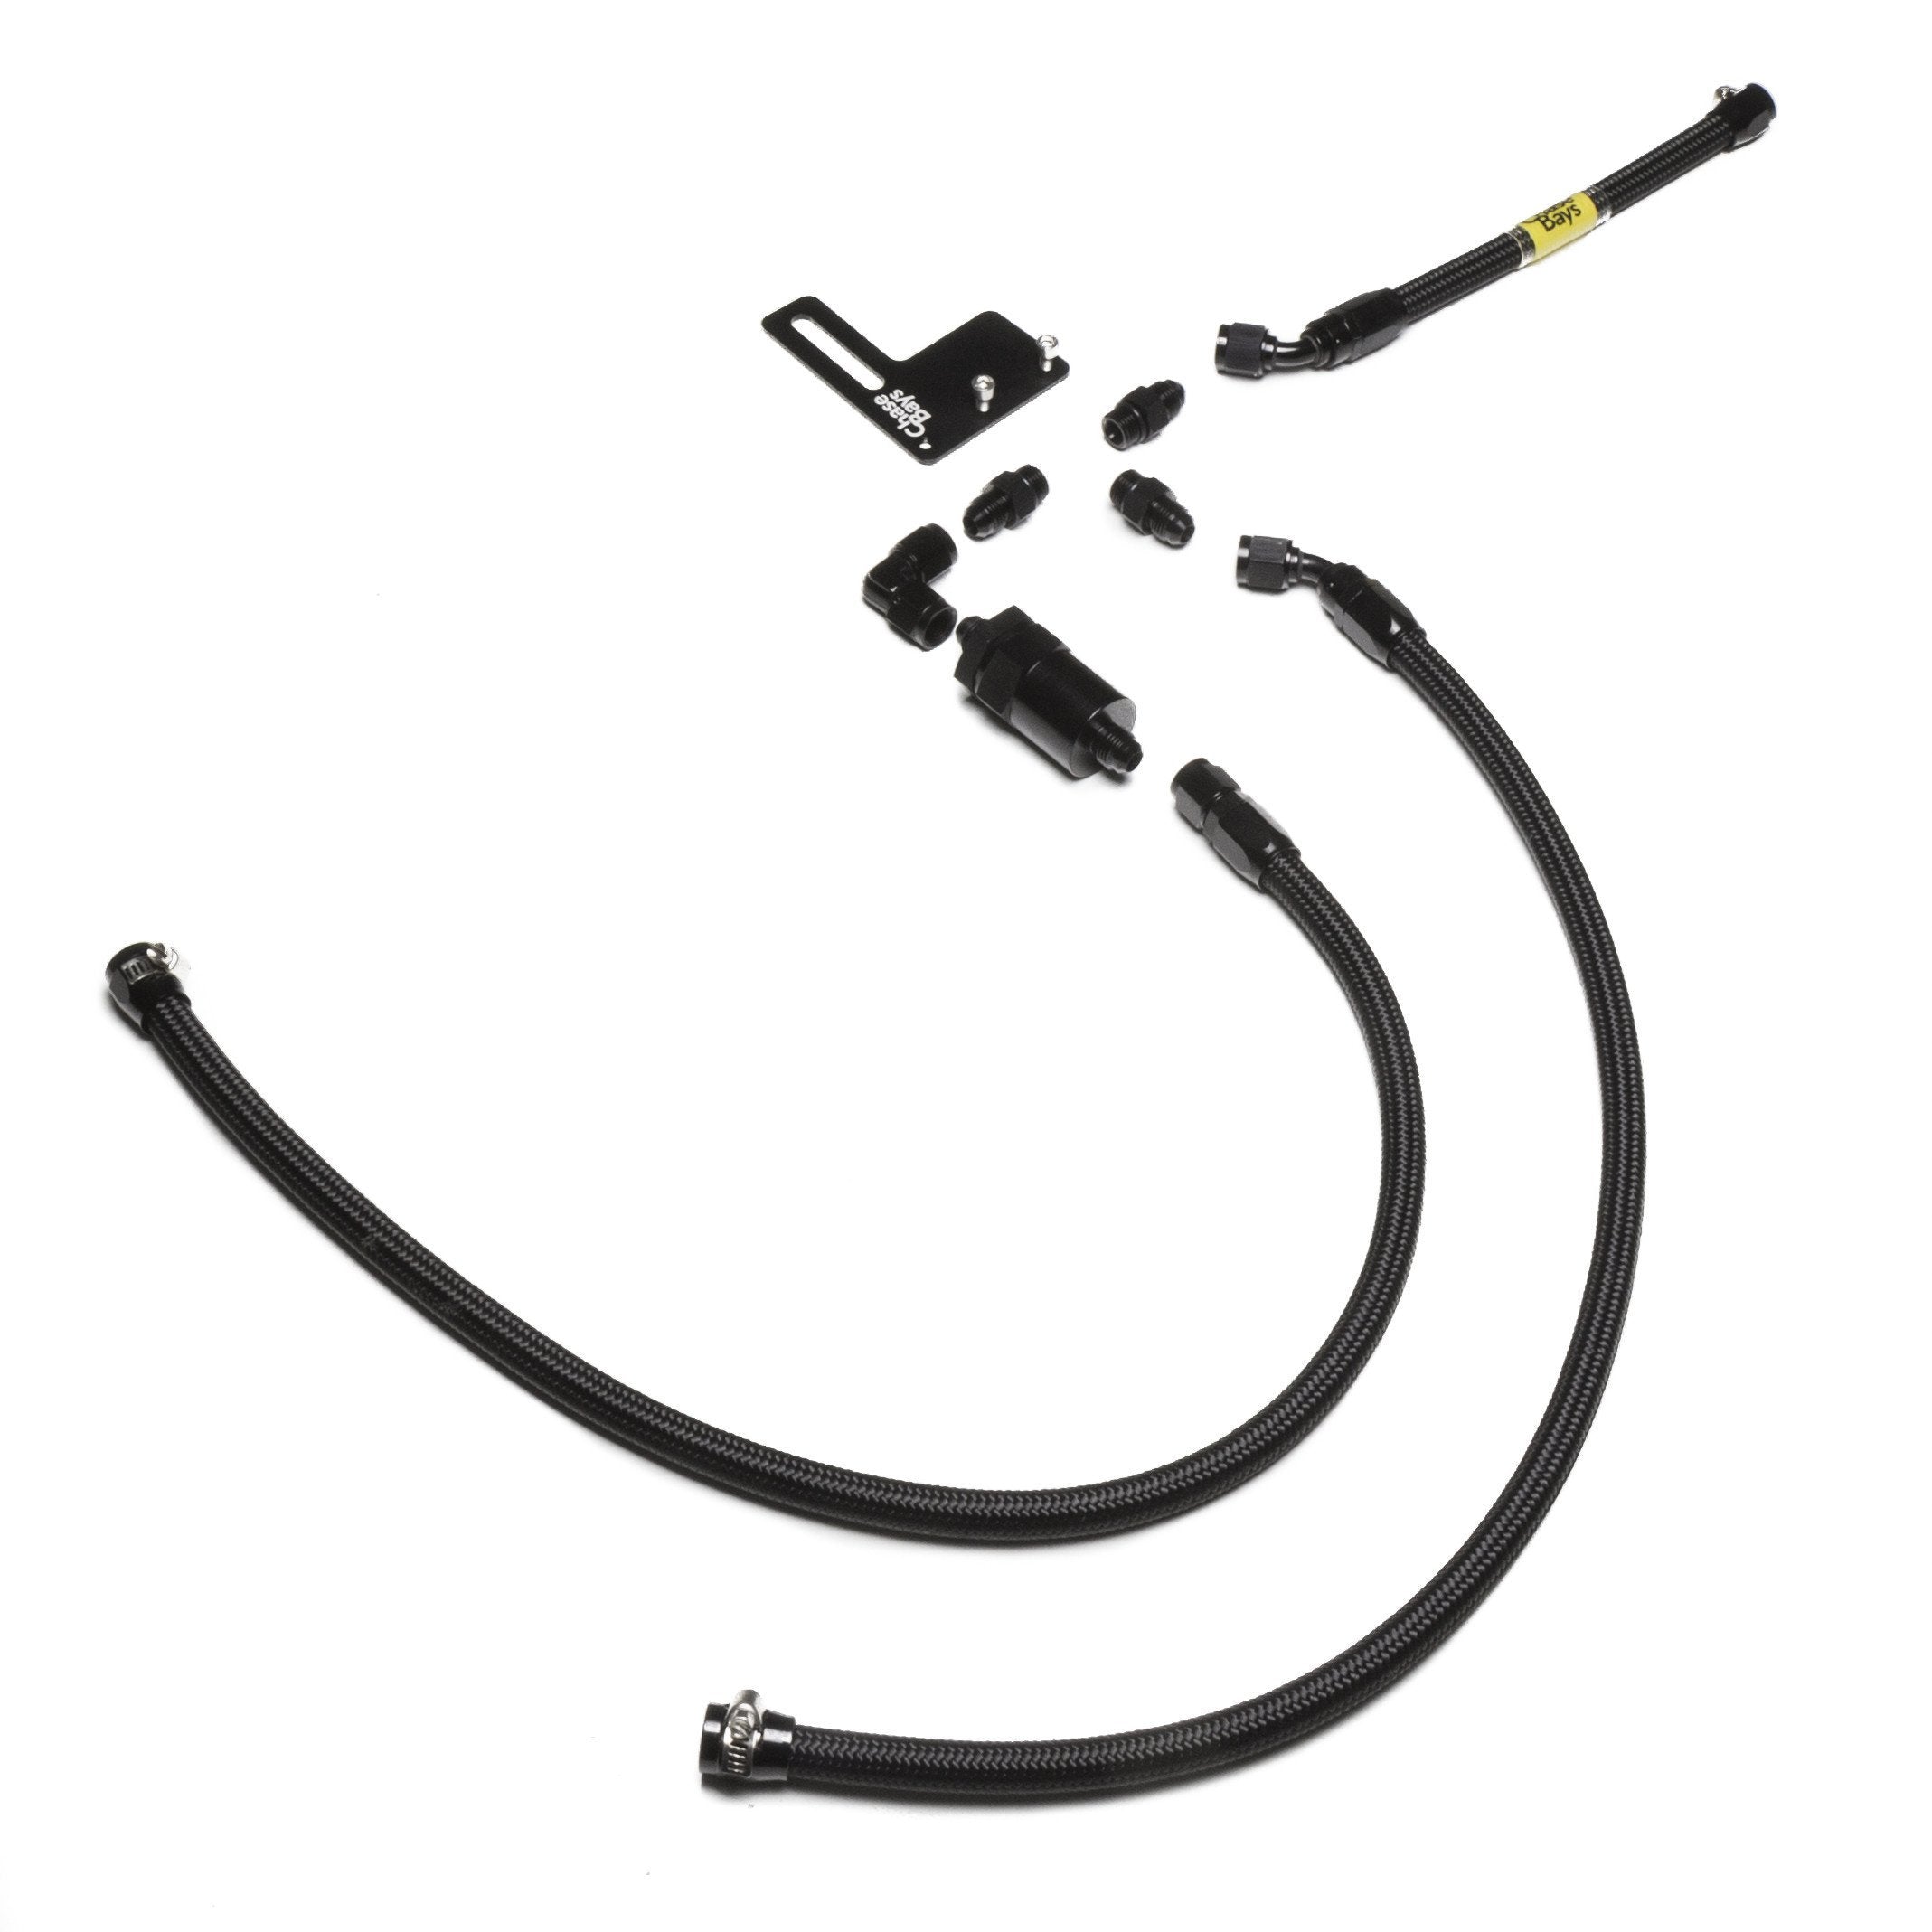 CHASE BAYS Nissan Silvia S13 S14 S15 Fuel Line Kit with Nissan VQ35DE Swap - PARTS33 GmbH